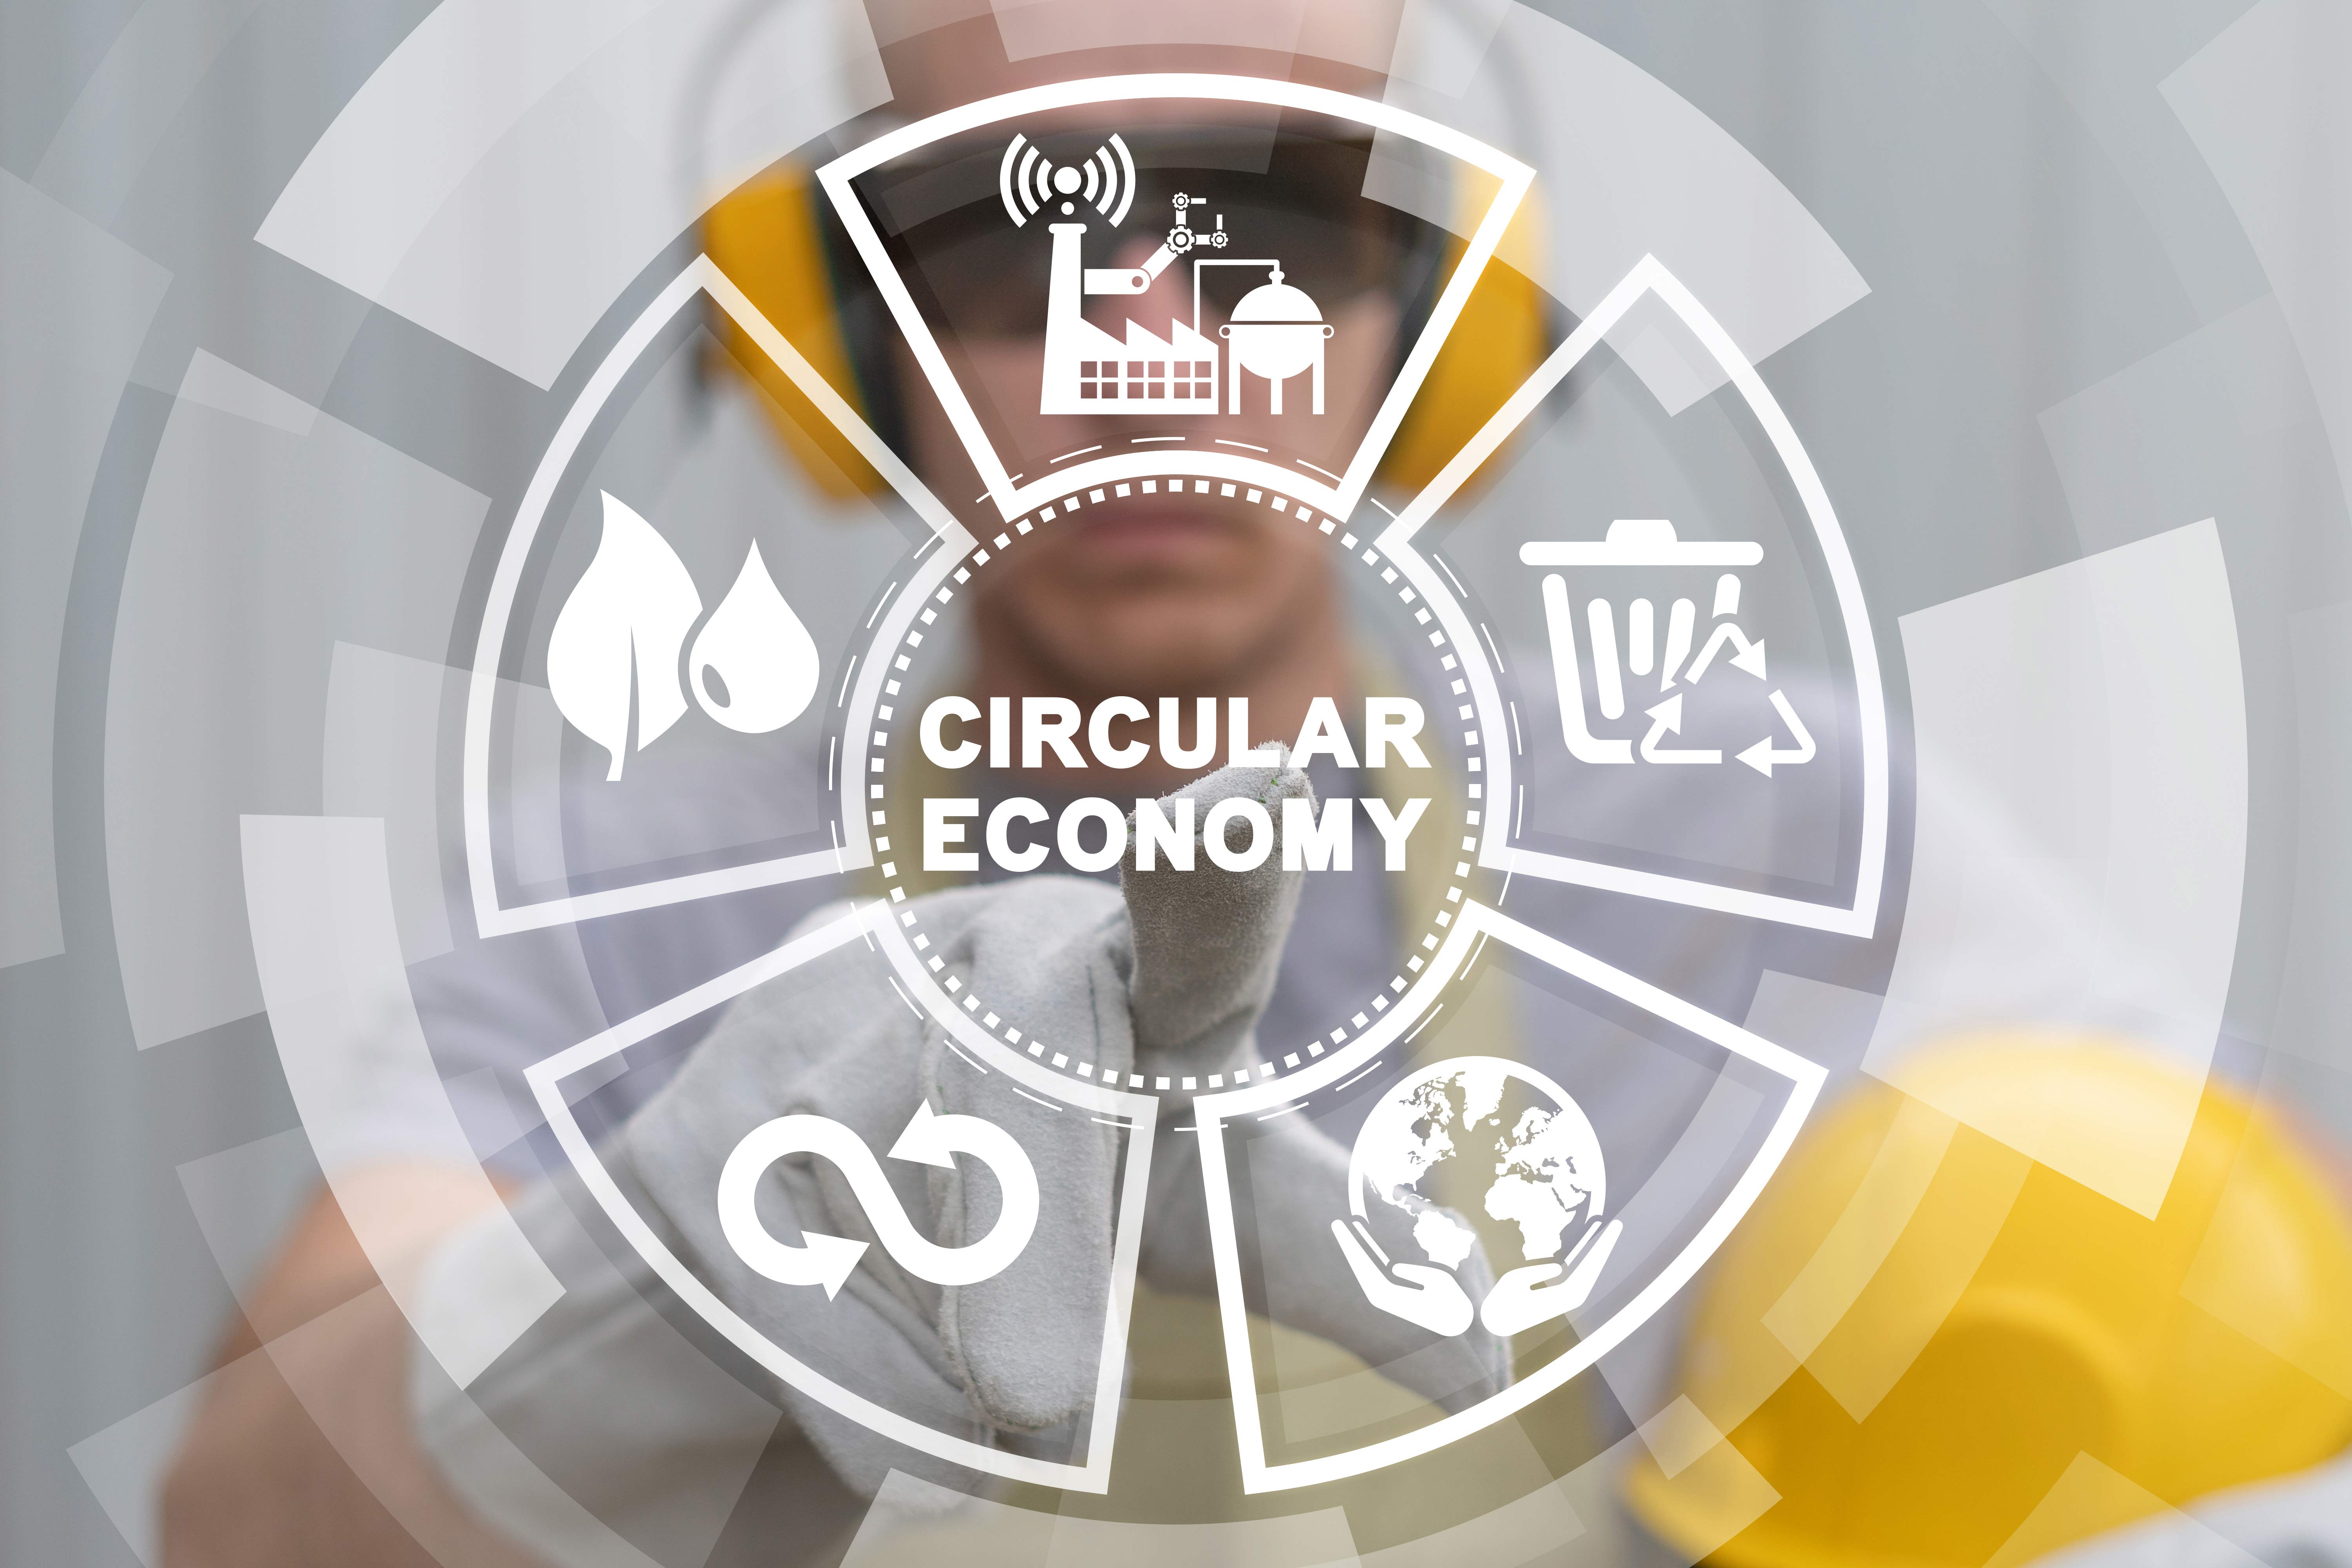 The circular economy explained through images